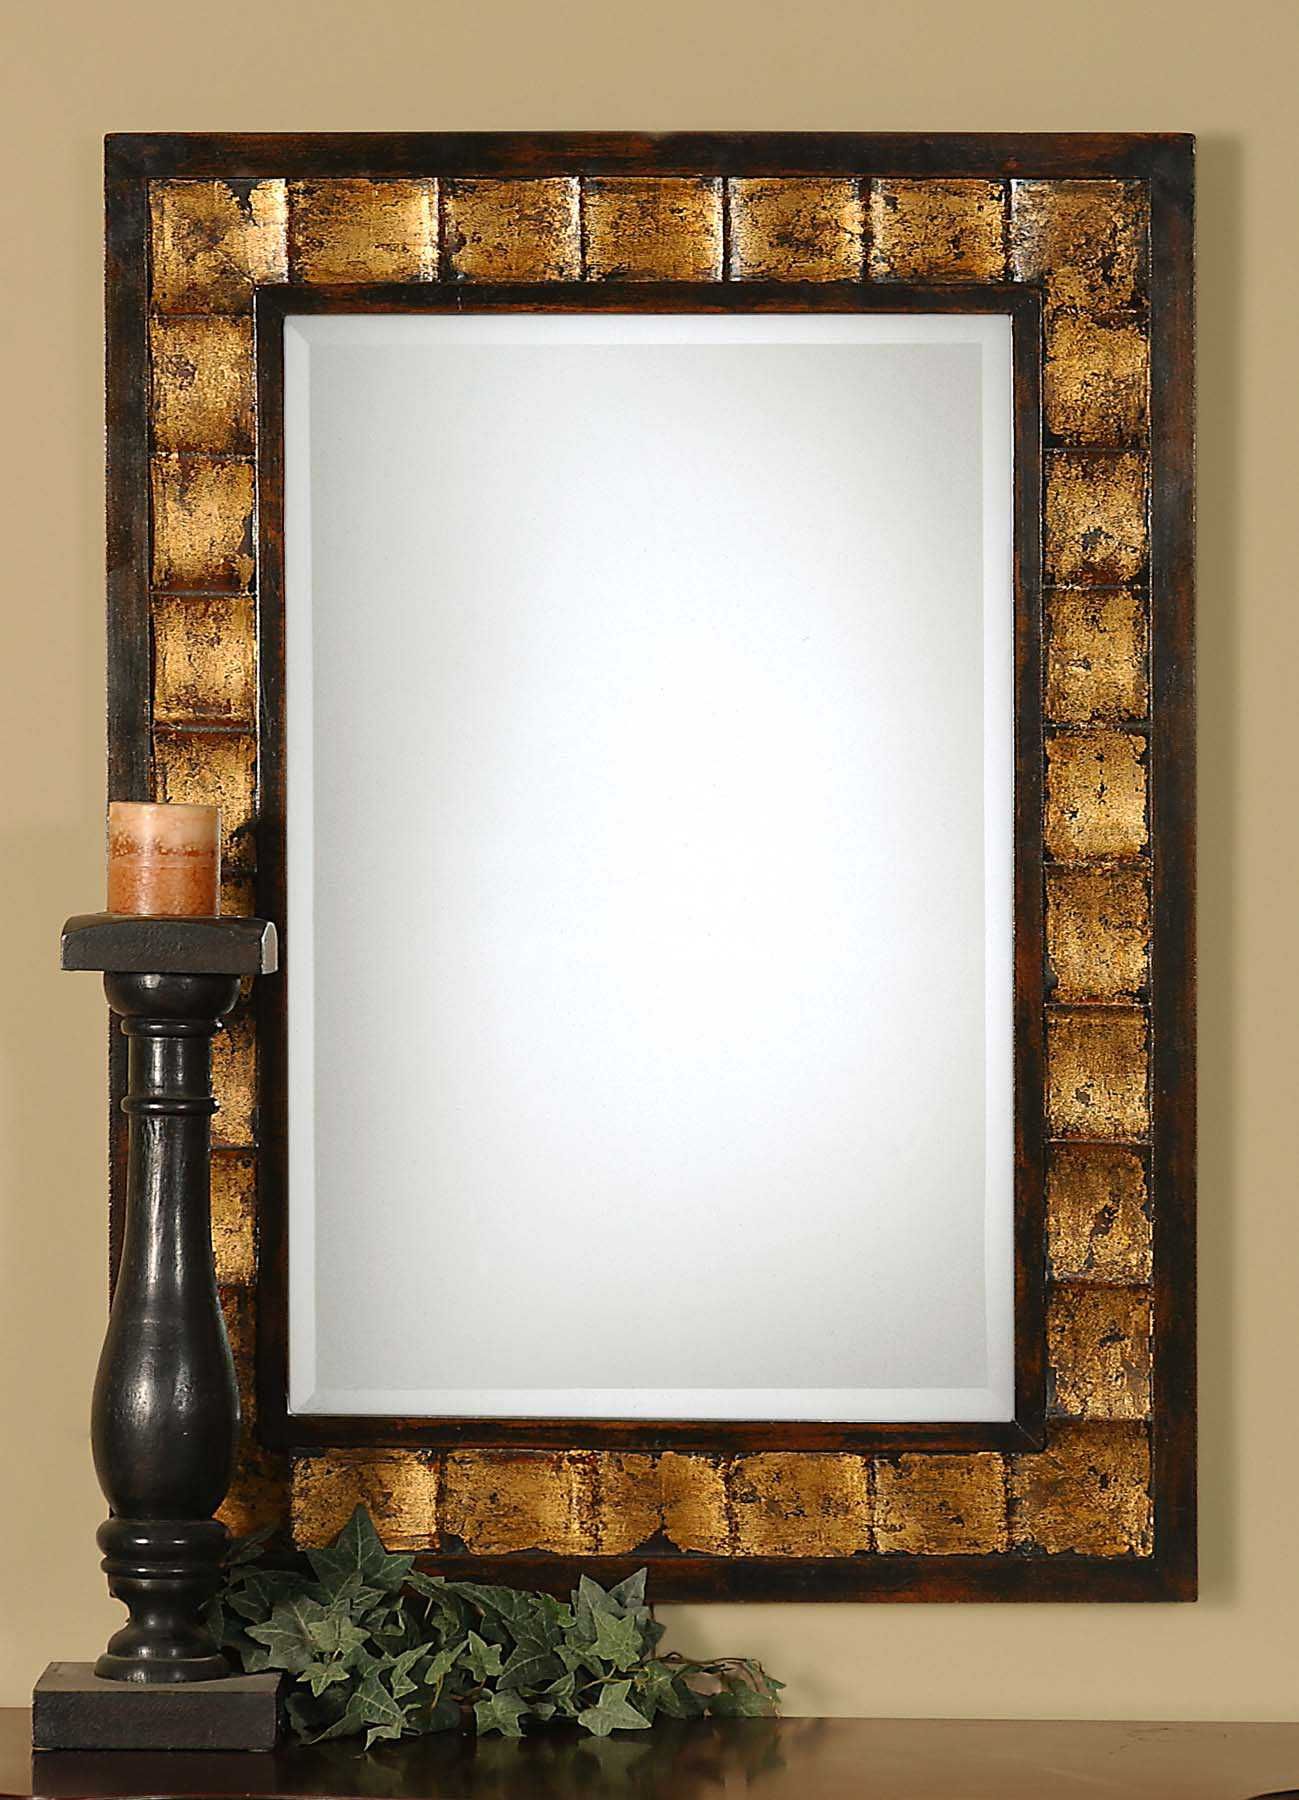 Uttermost Justus 28 X 38 Decorative Gold Wall Mirror | Ut13294b Pertaining To Gold Decorative Wall Mirrors (View 9 of 15)